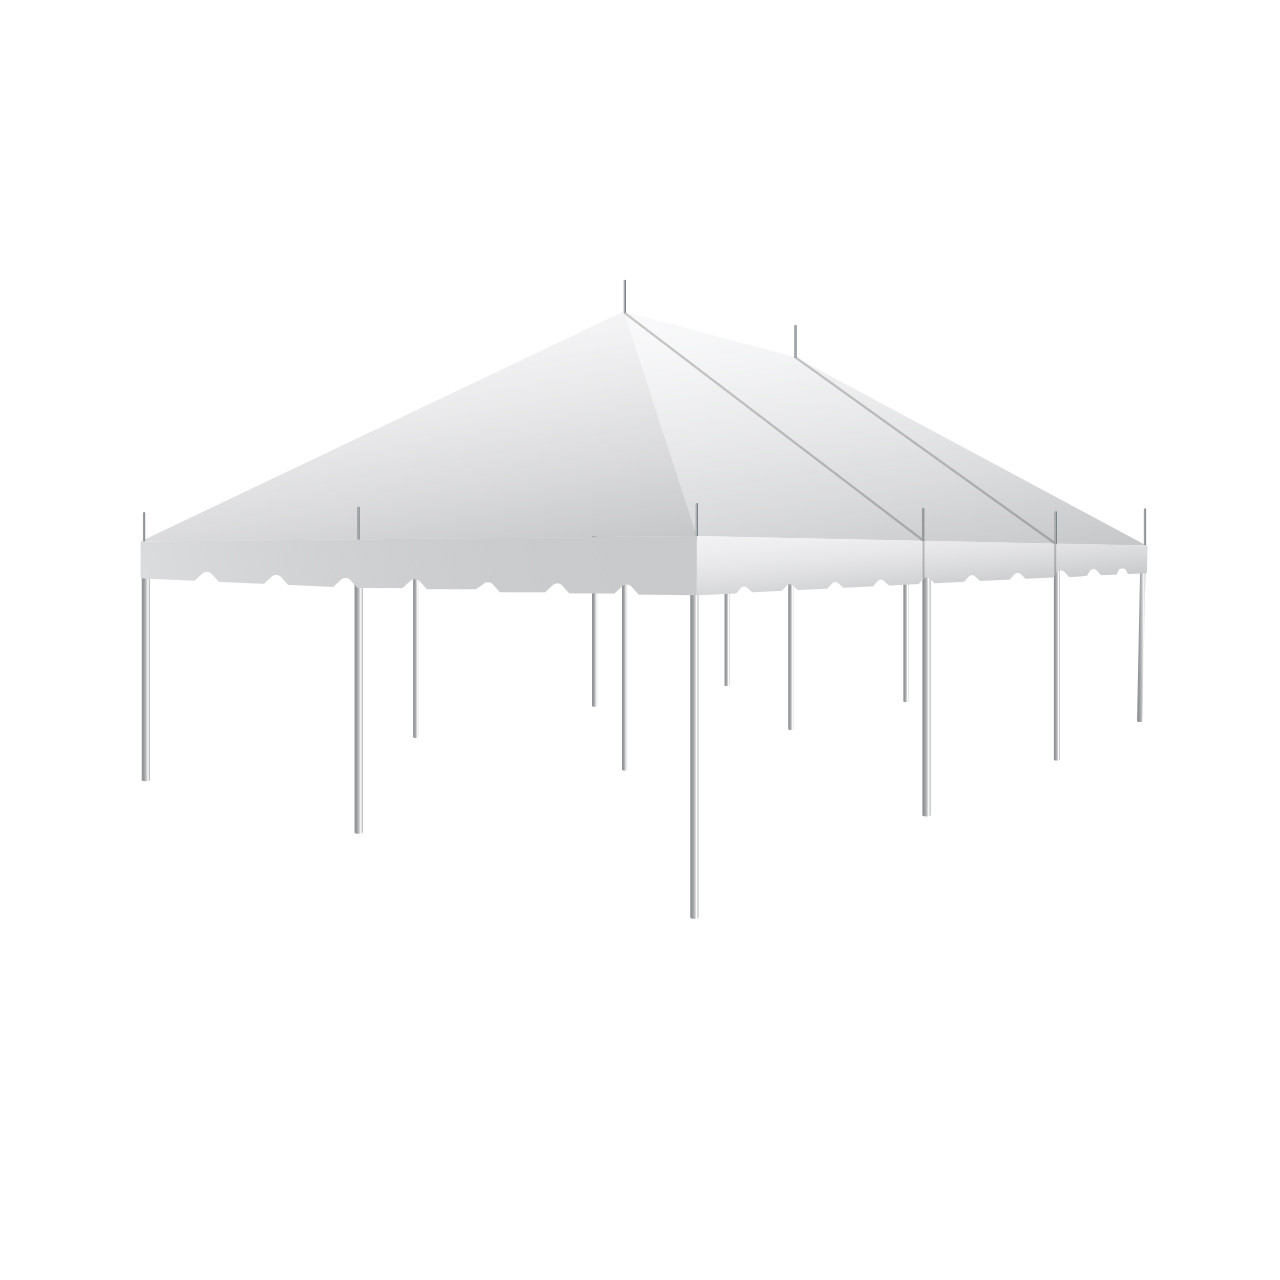 20' x 30' Classic Series Pole Tent, Sectional Tent Top, Complete